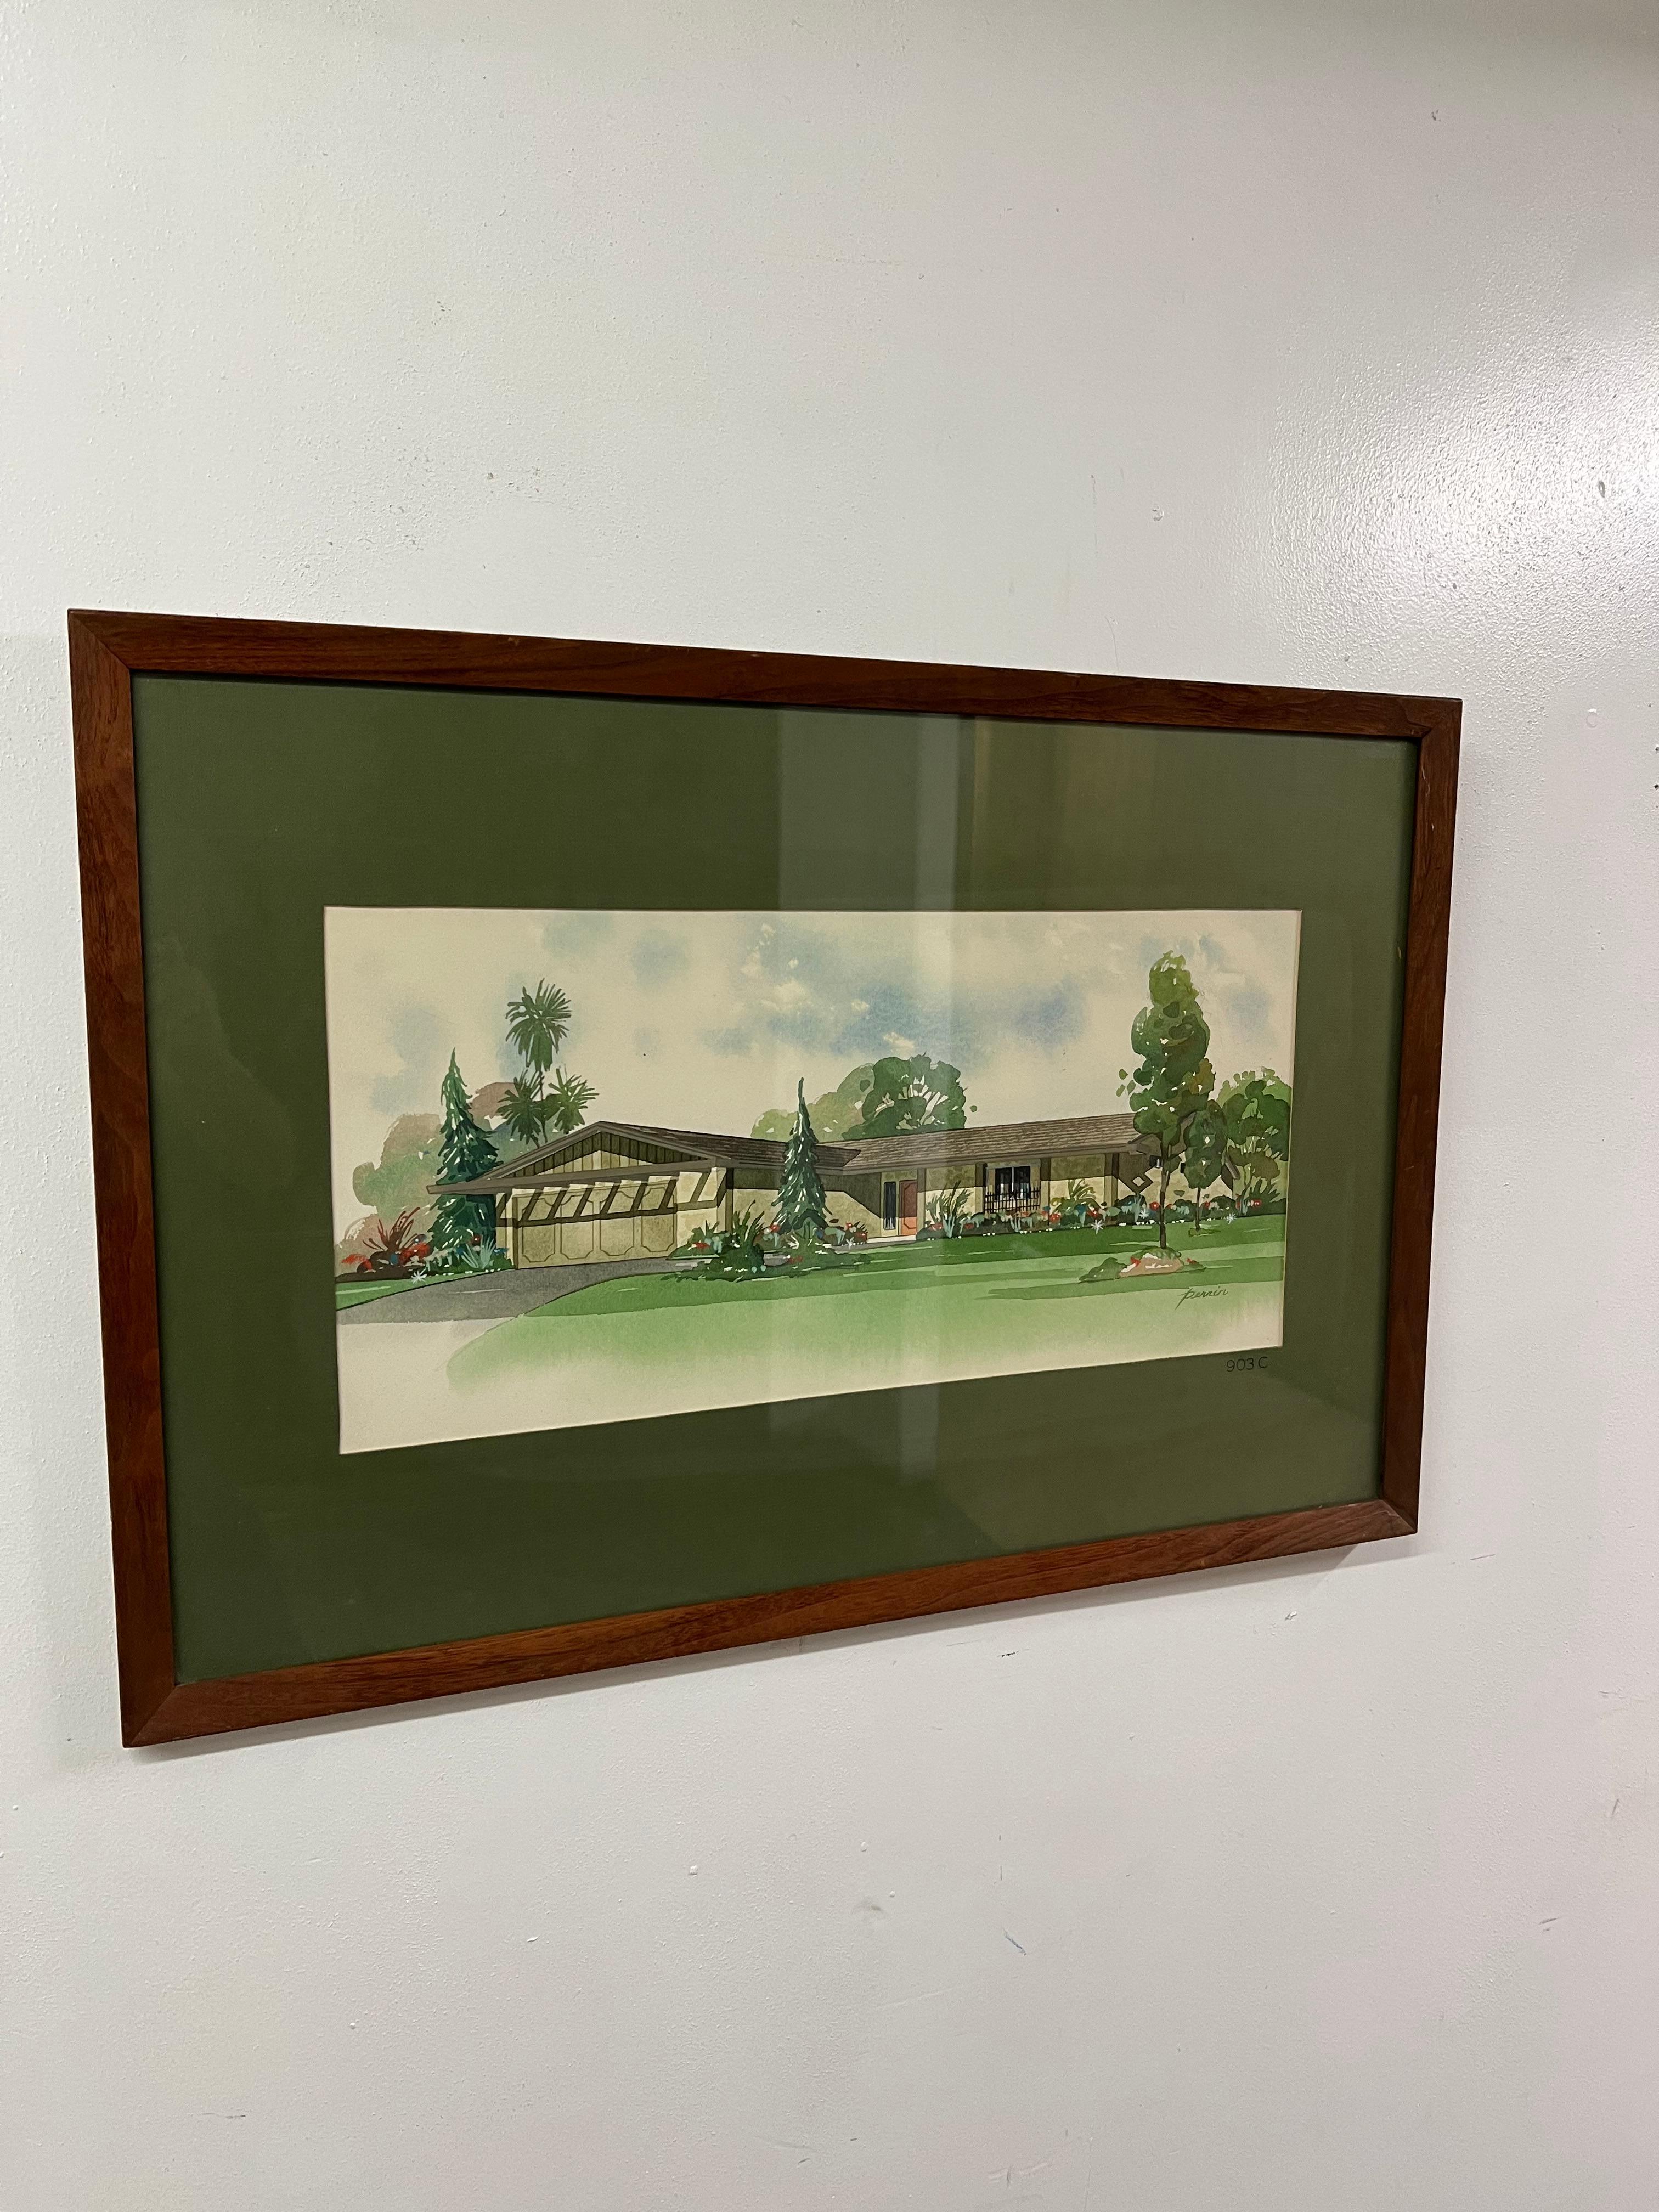 Architectural rendering of a Southern California ranch-style home by the artist Perrin. A watercolor rendering featuring greens and browns, with lush landscaping. 

This original piece has been framed with a forest green matte. Great for many